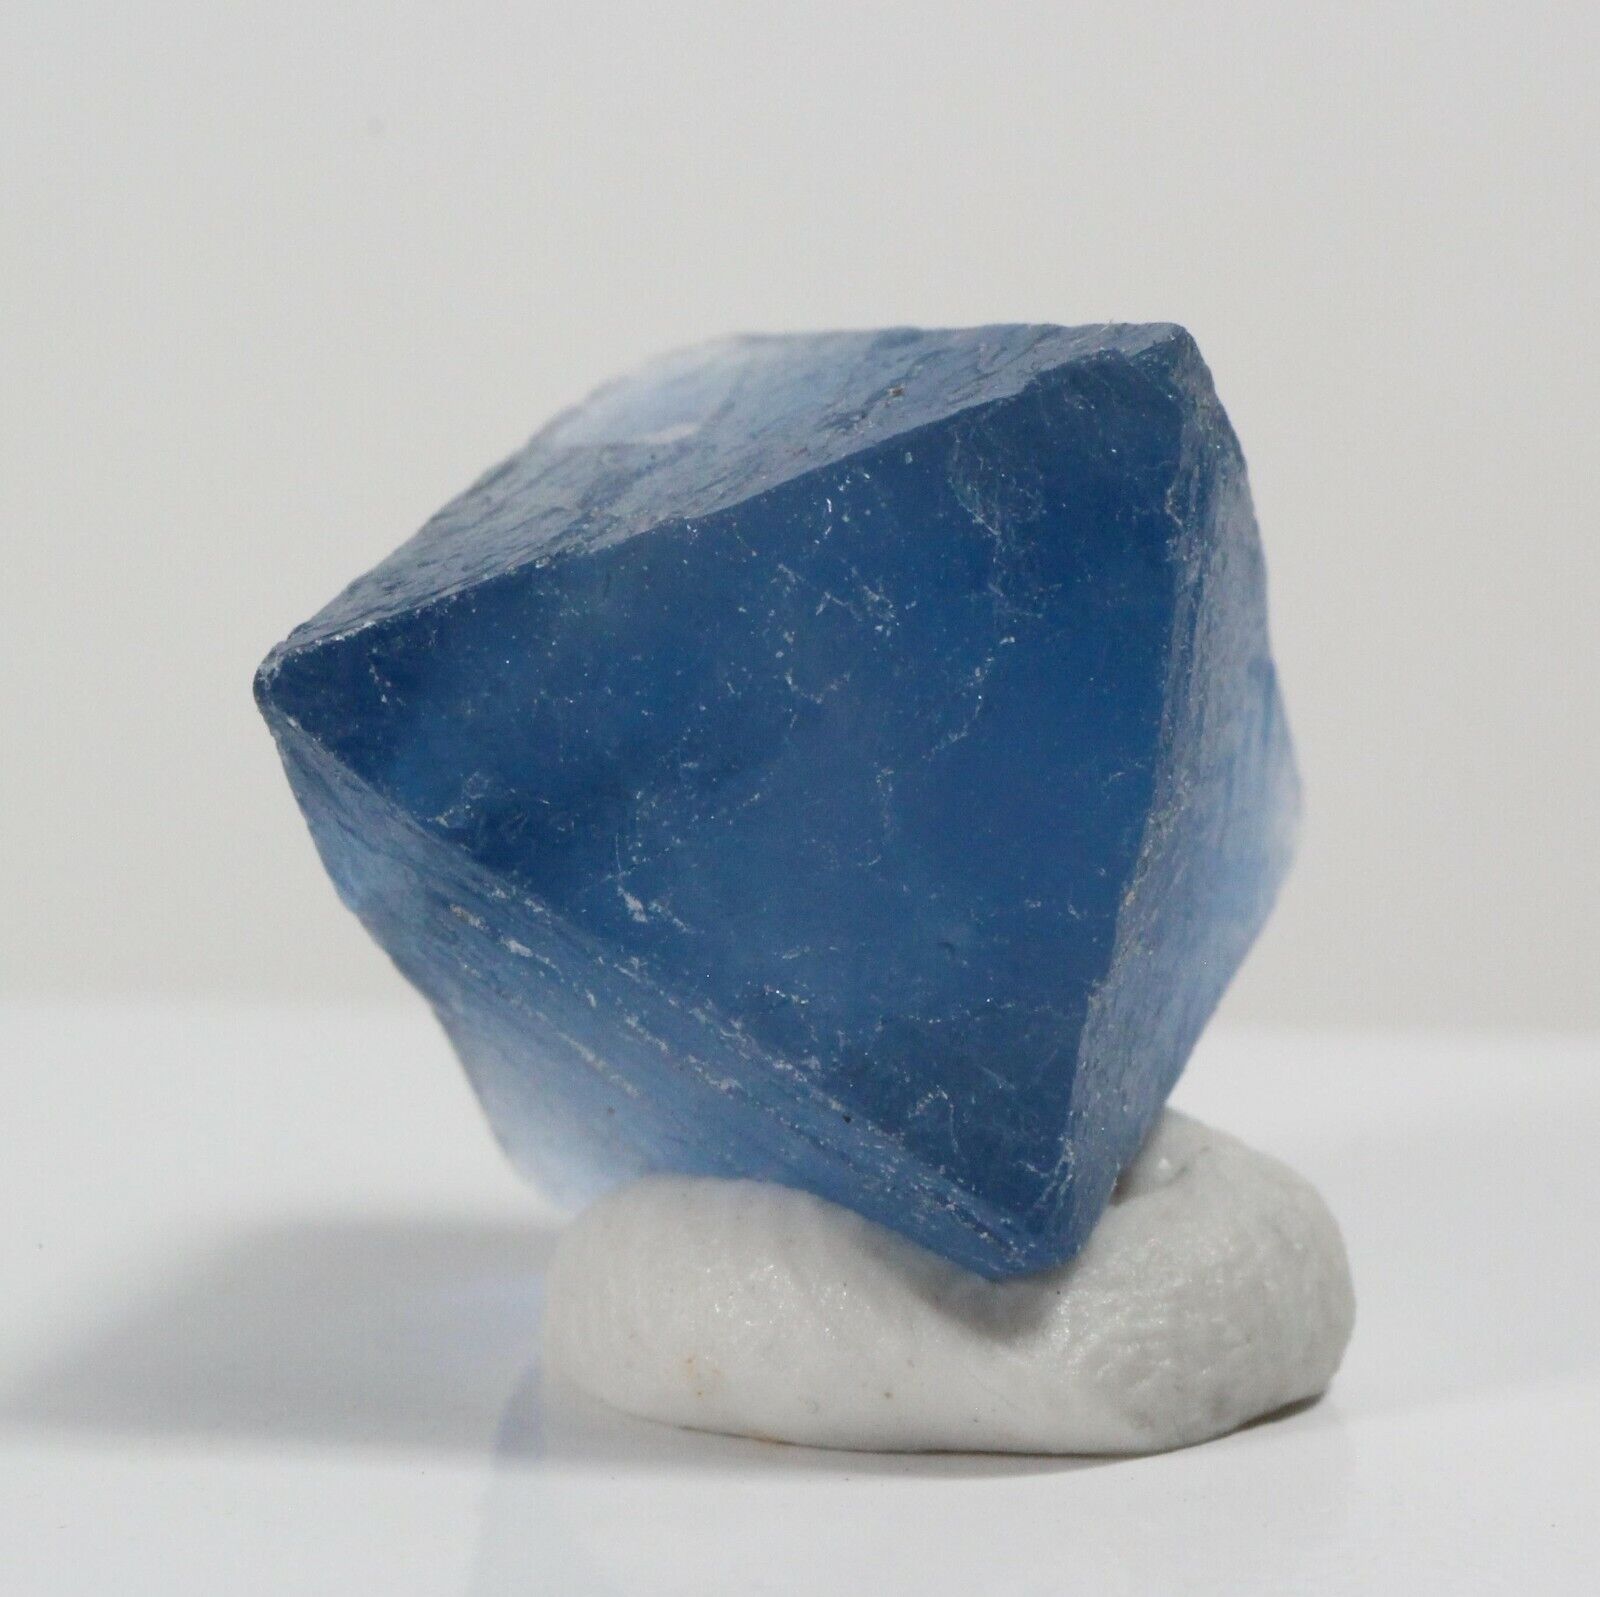 19.10ct Blue Fluorite Octahedron Crystal Gem Mineral New Mexico Blanchard 83